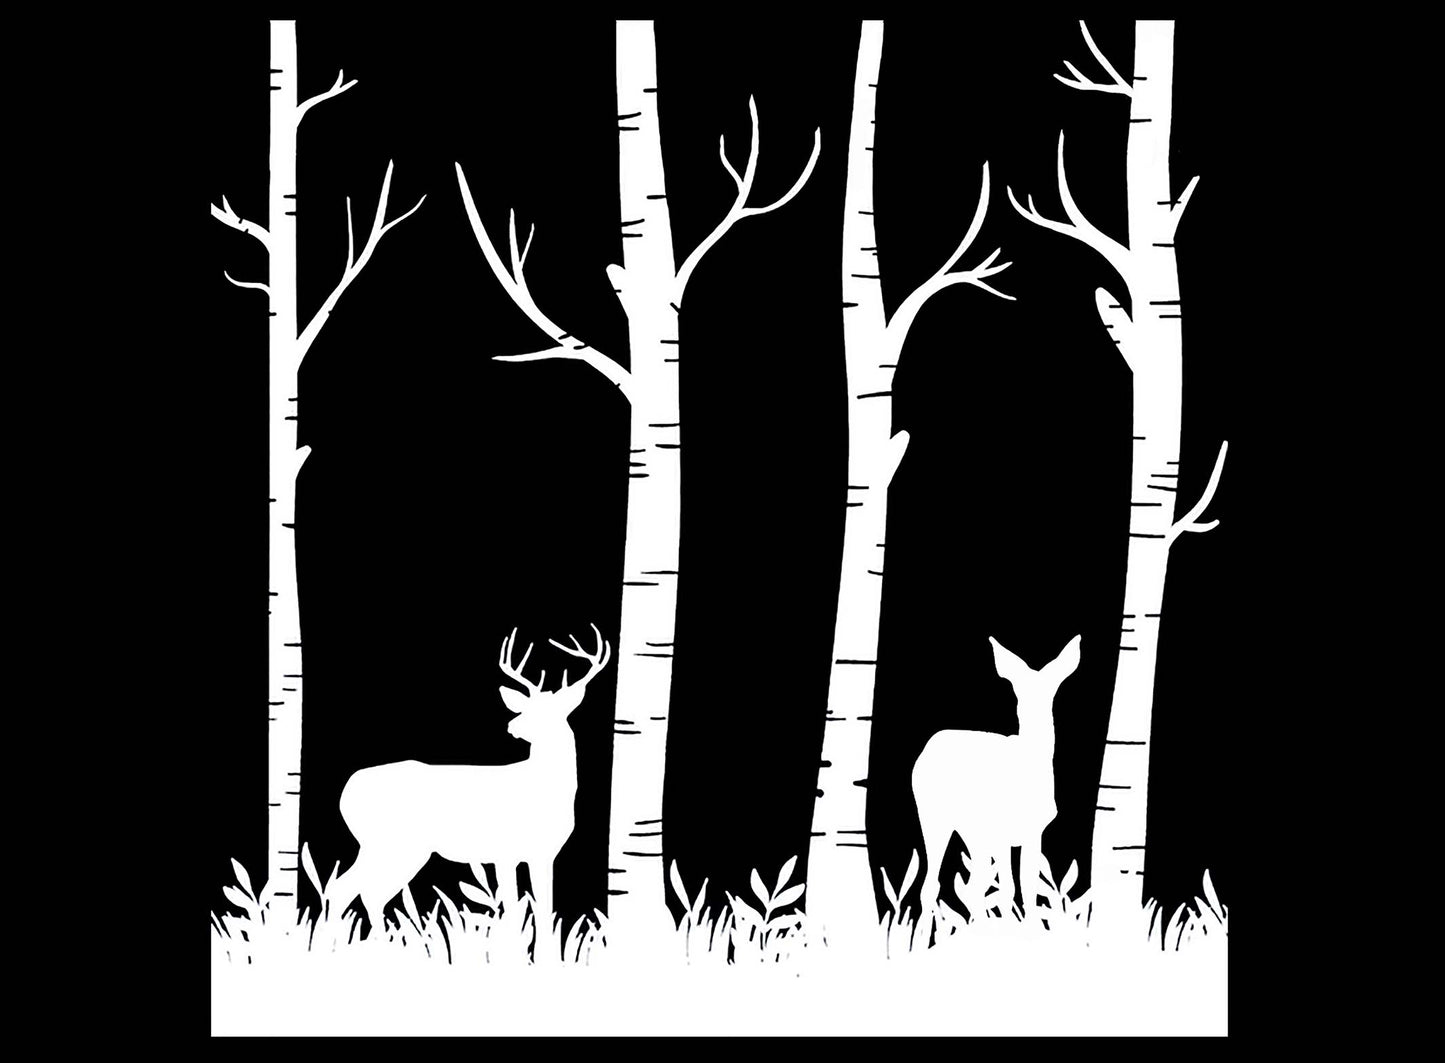 Deer in Woods 2 pcs 4" White Fused Glass Decals